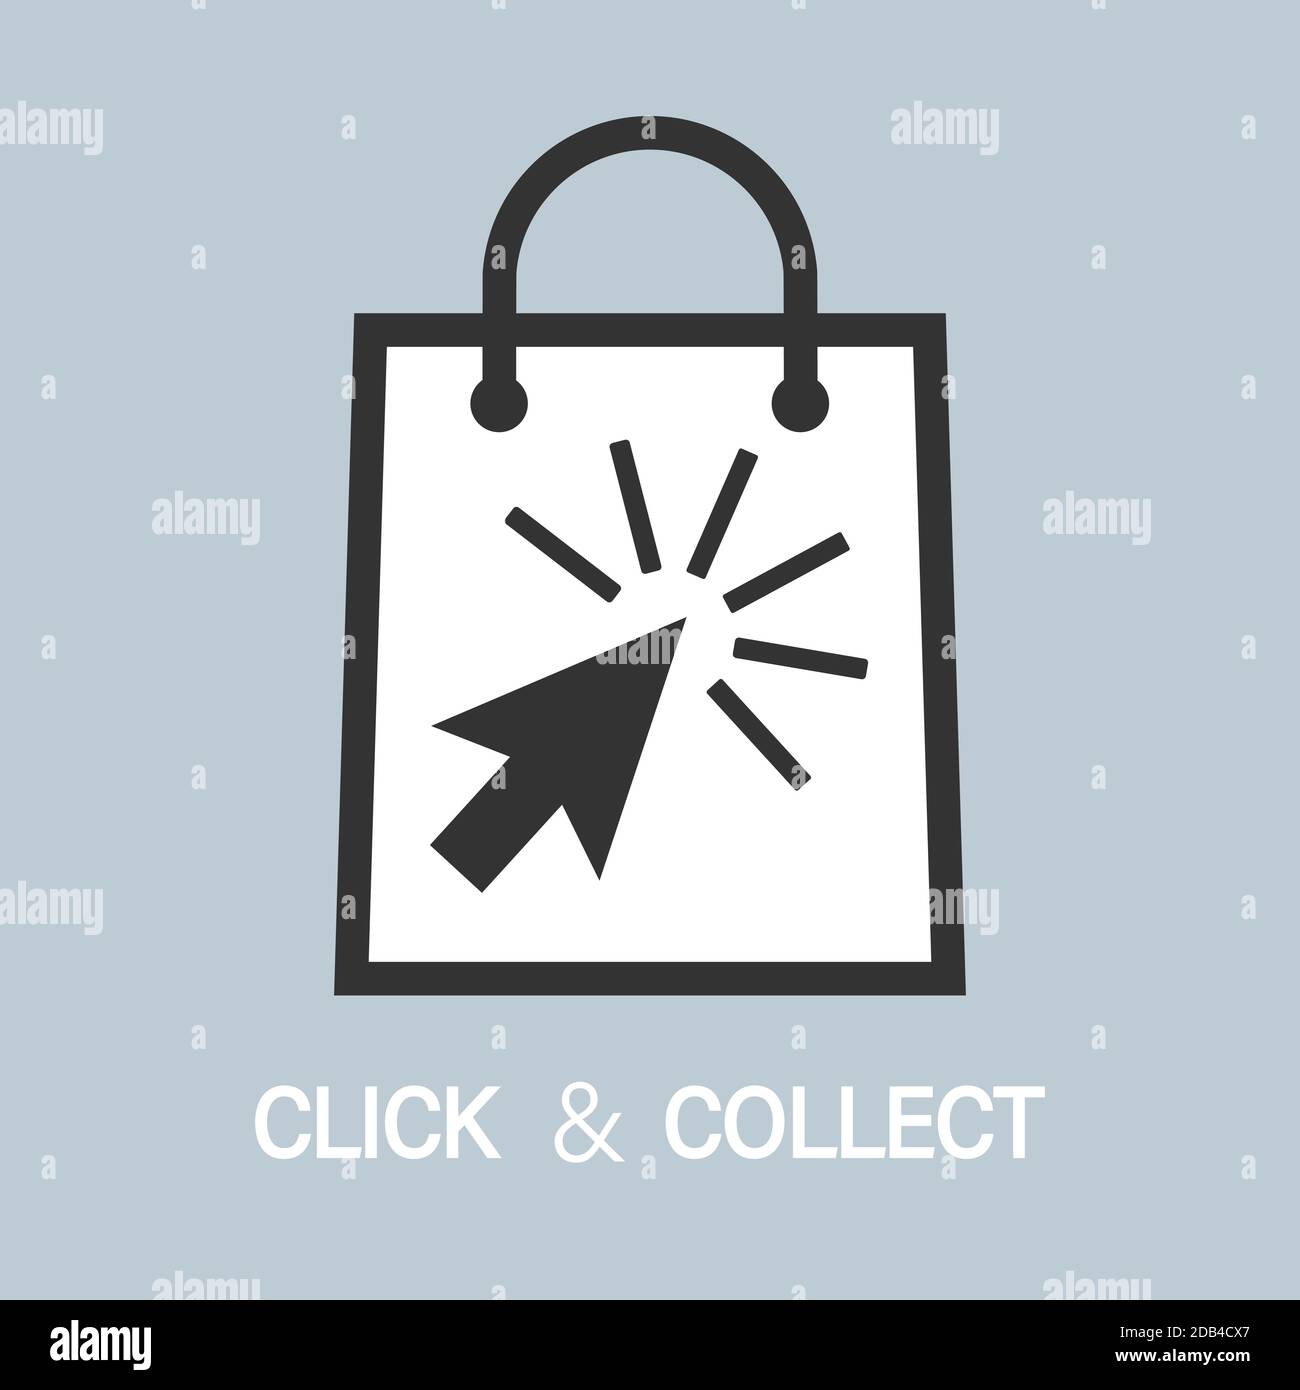 buy online and pick up in store, click and collect concept vector illustration Stock Vector